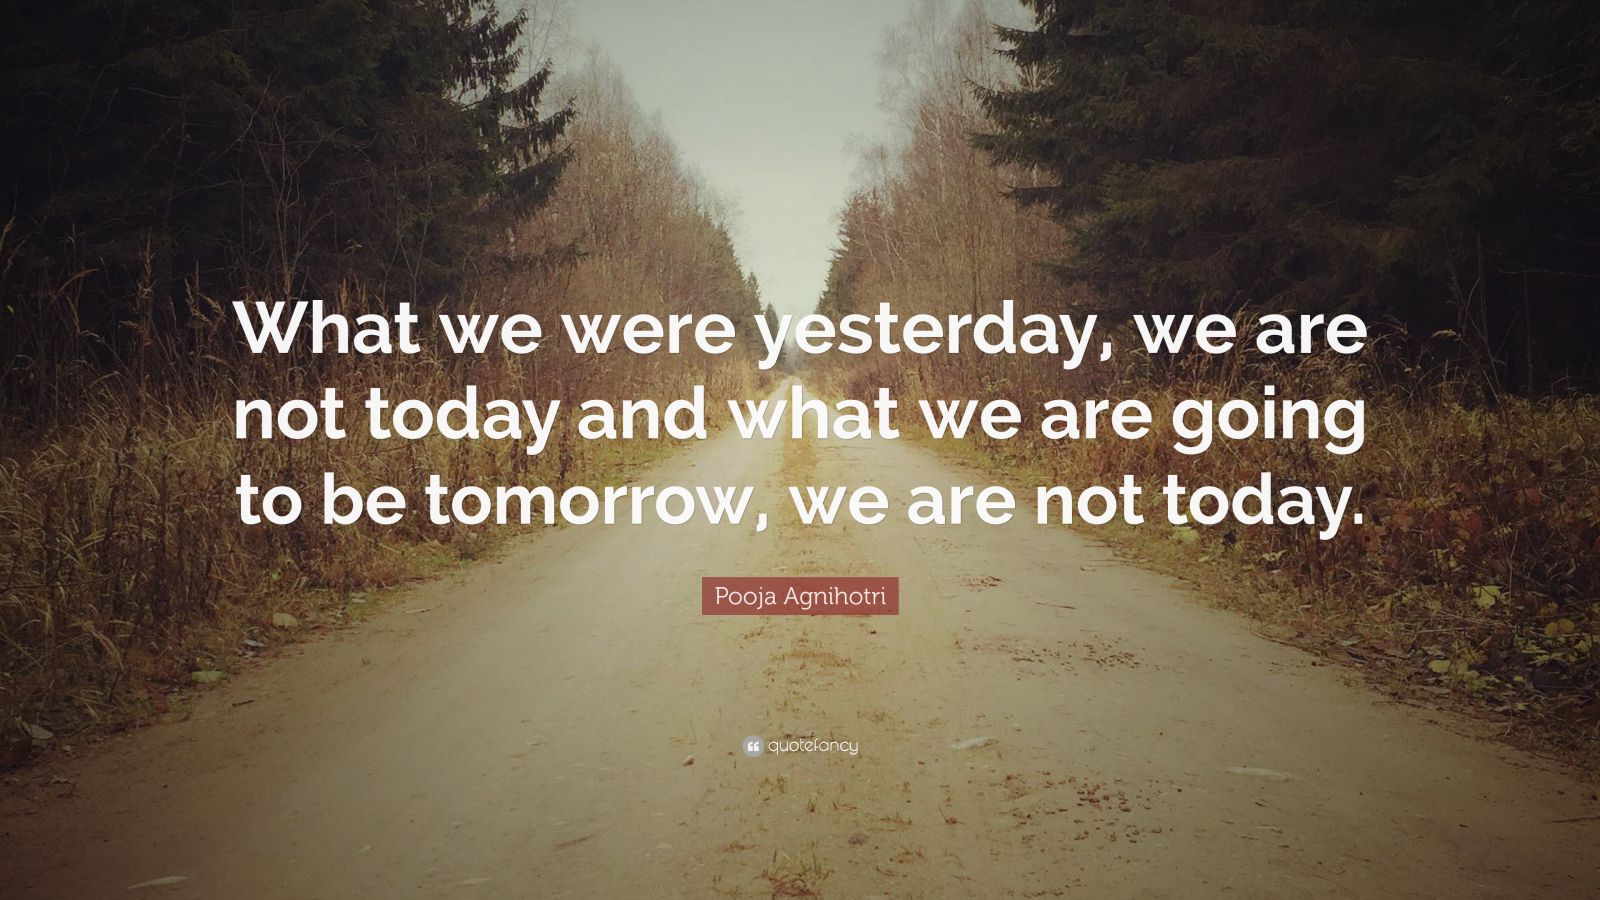 Pooja Agnihotri Quote: “What we were yesterday, we are not today and ...